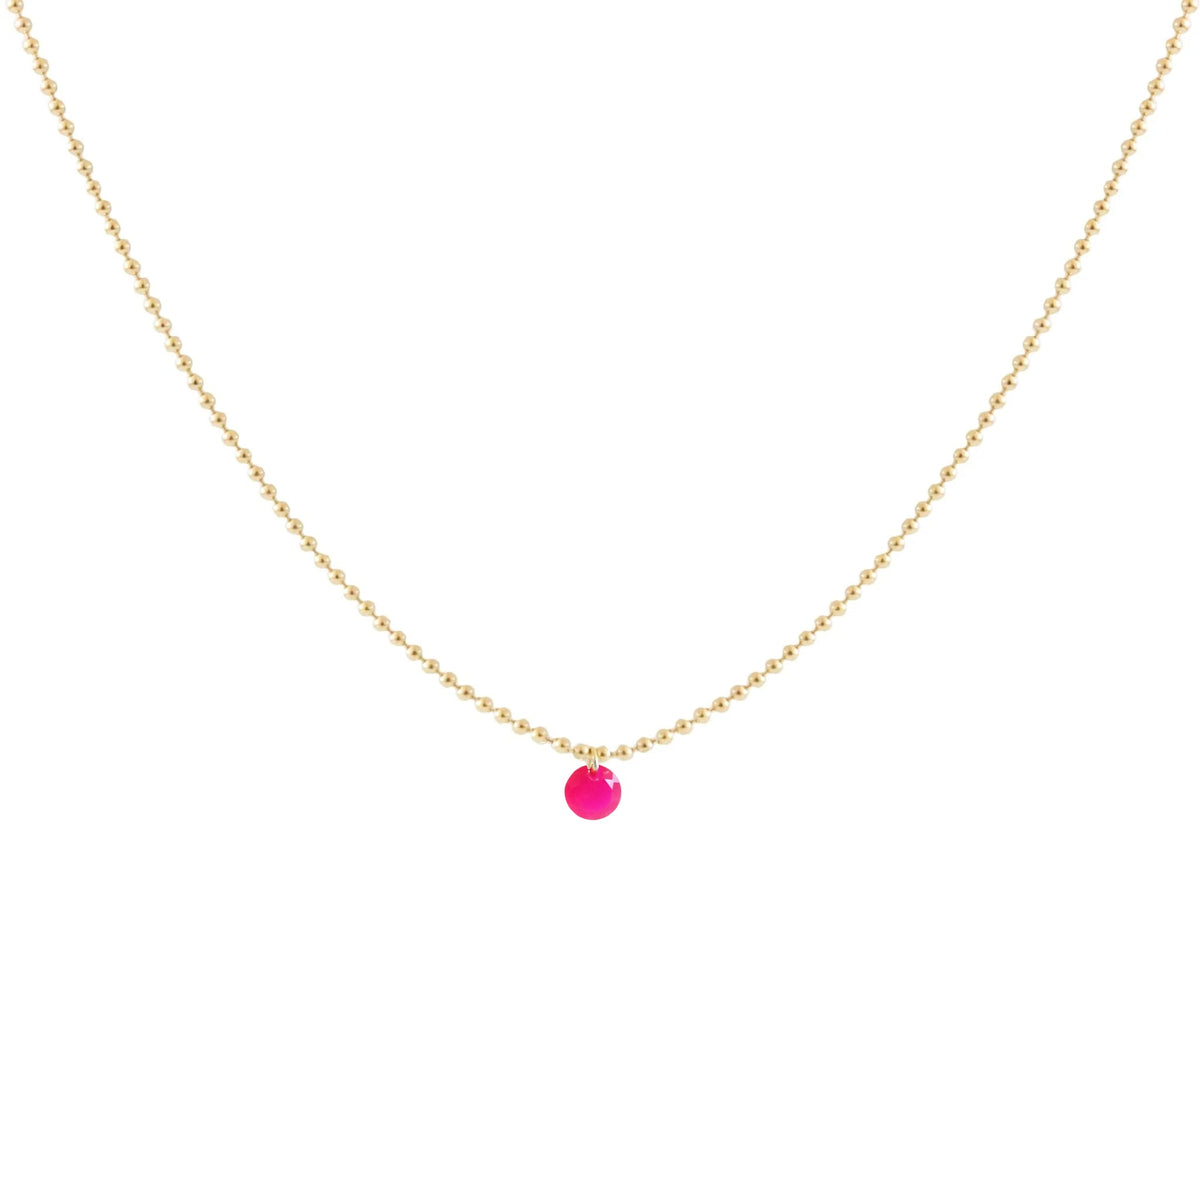 DAINTY RADIANT SOLITAIRE NECKLACE - HOT PINK CHALCEDONY &amp; GOLD - SO PRETTY CARA COTTER